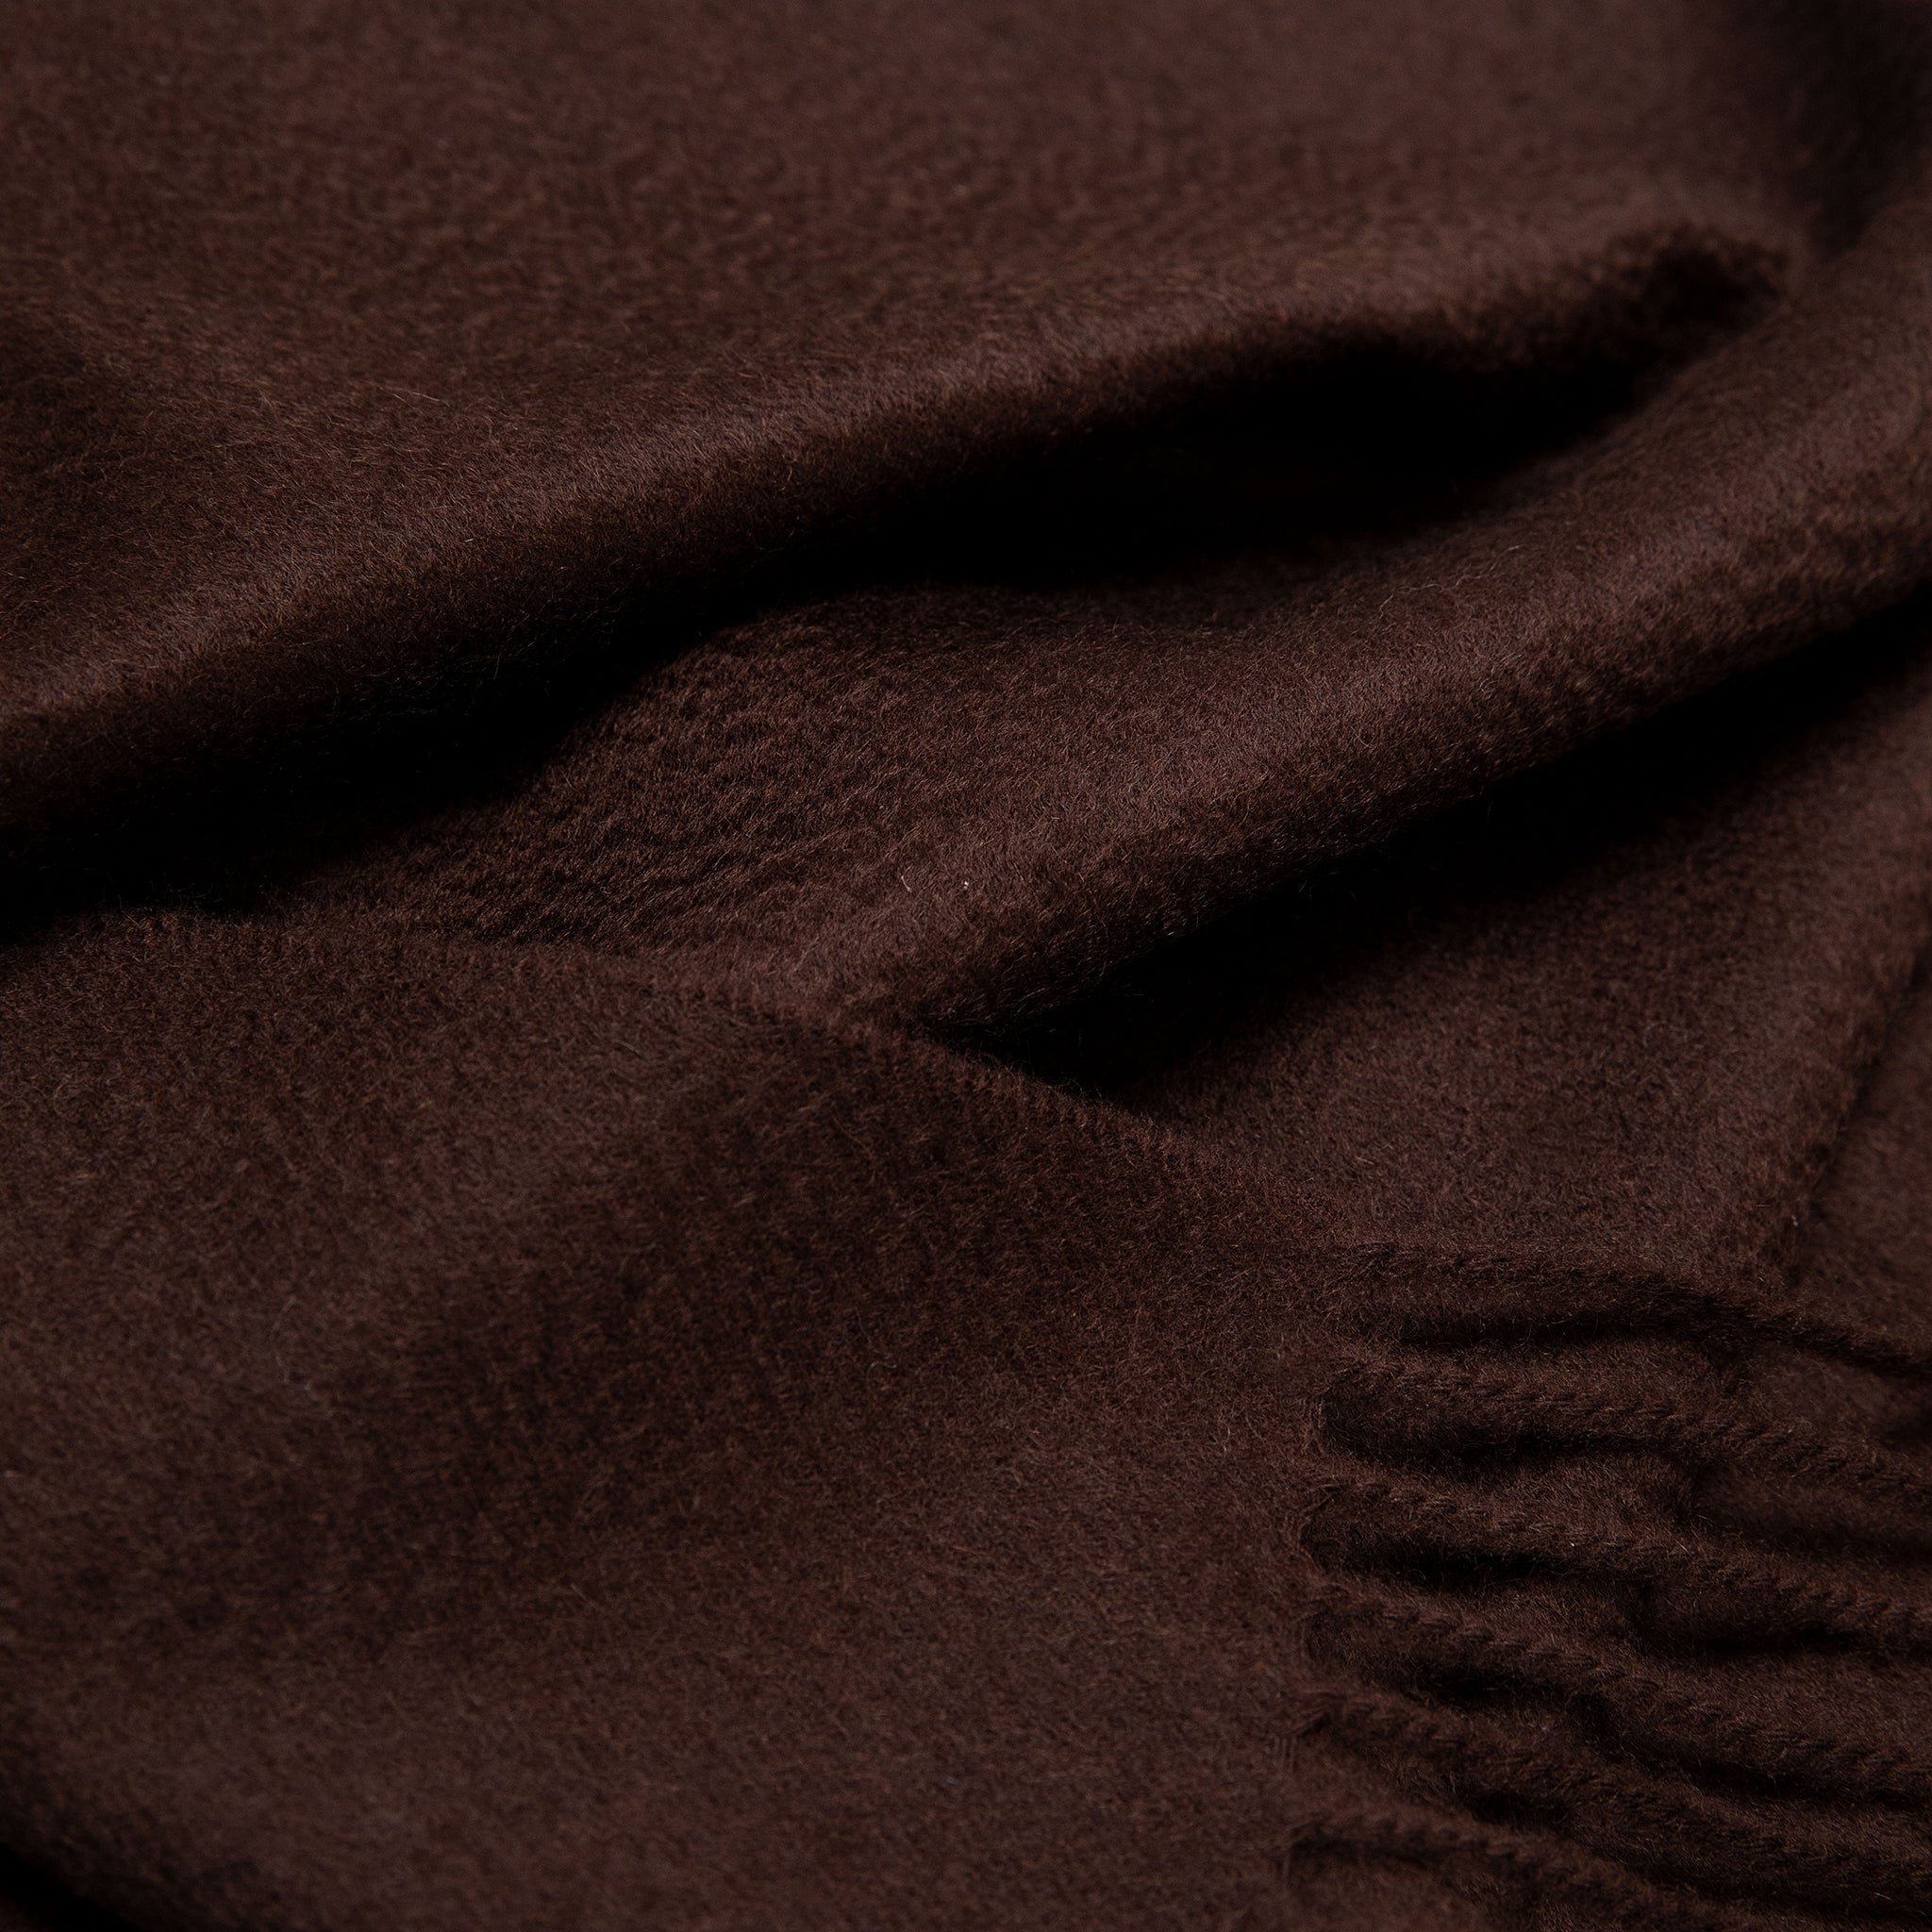 Woven cashmere scarf in espresso brown - Colhay's